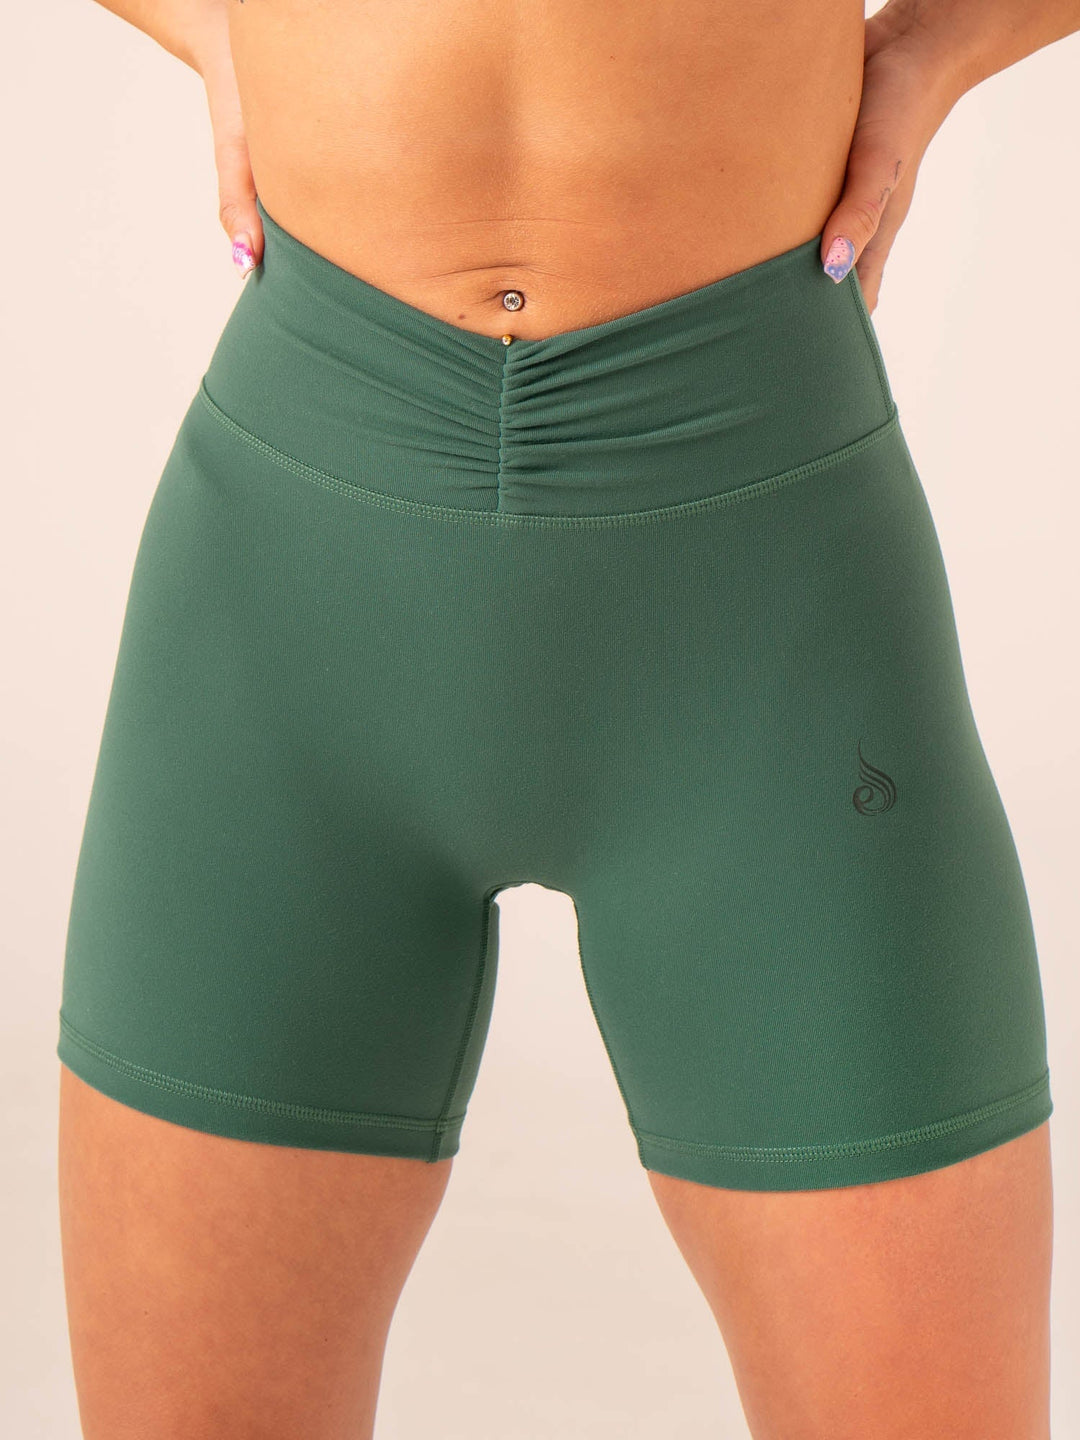 Tempo Shorts - College Green Clothing Ryderwear 